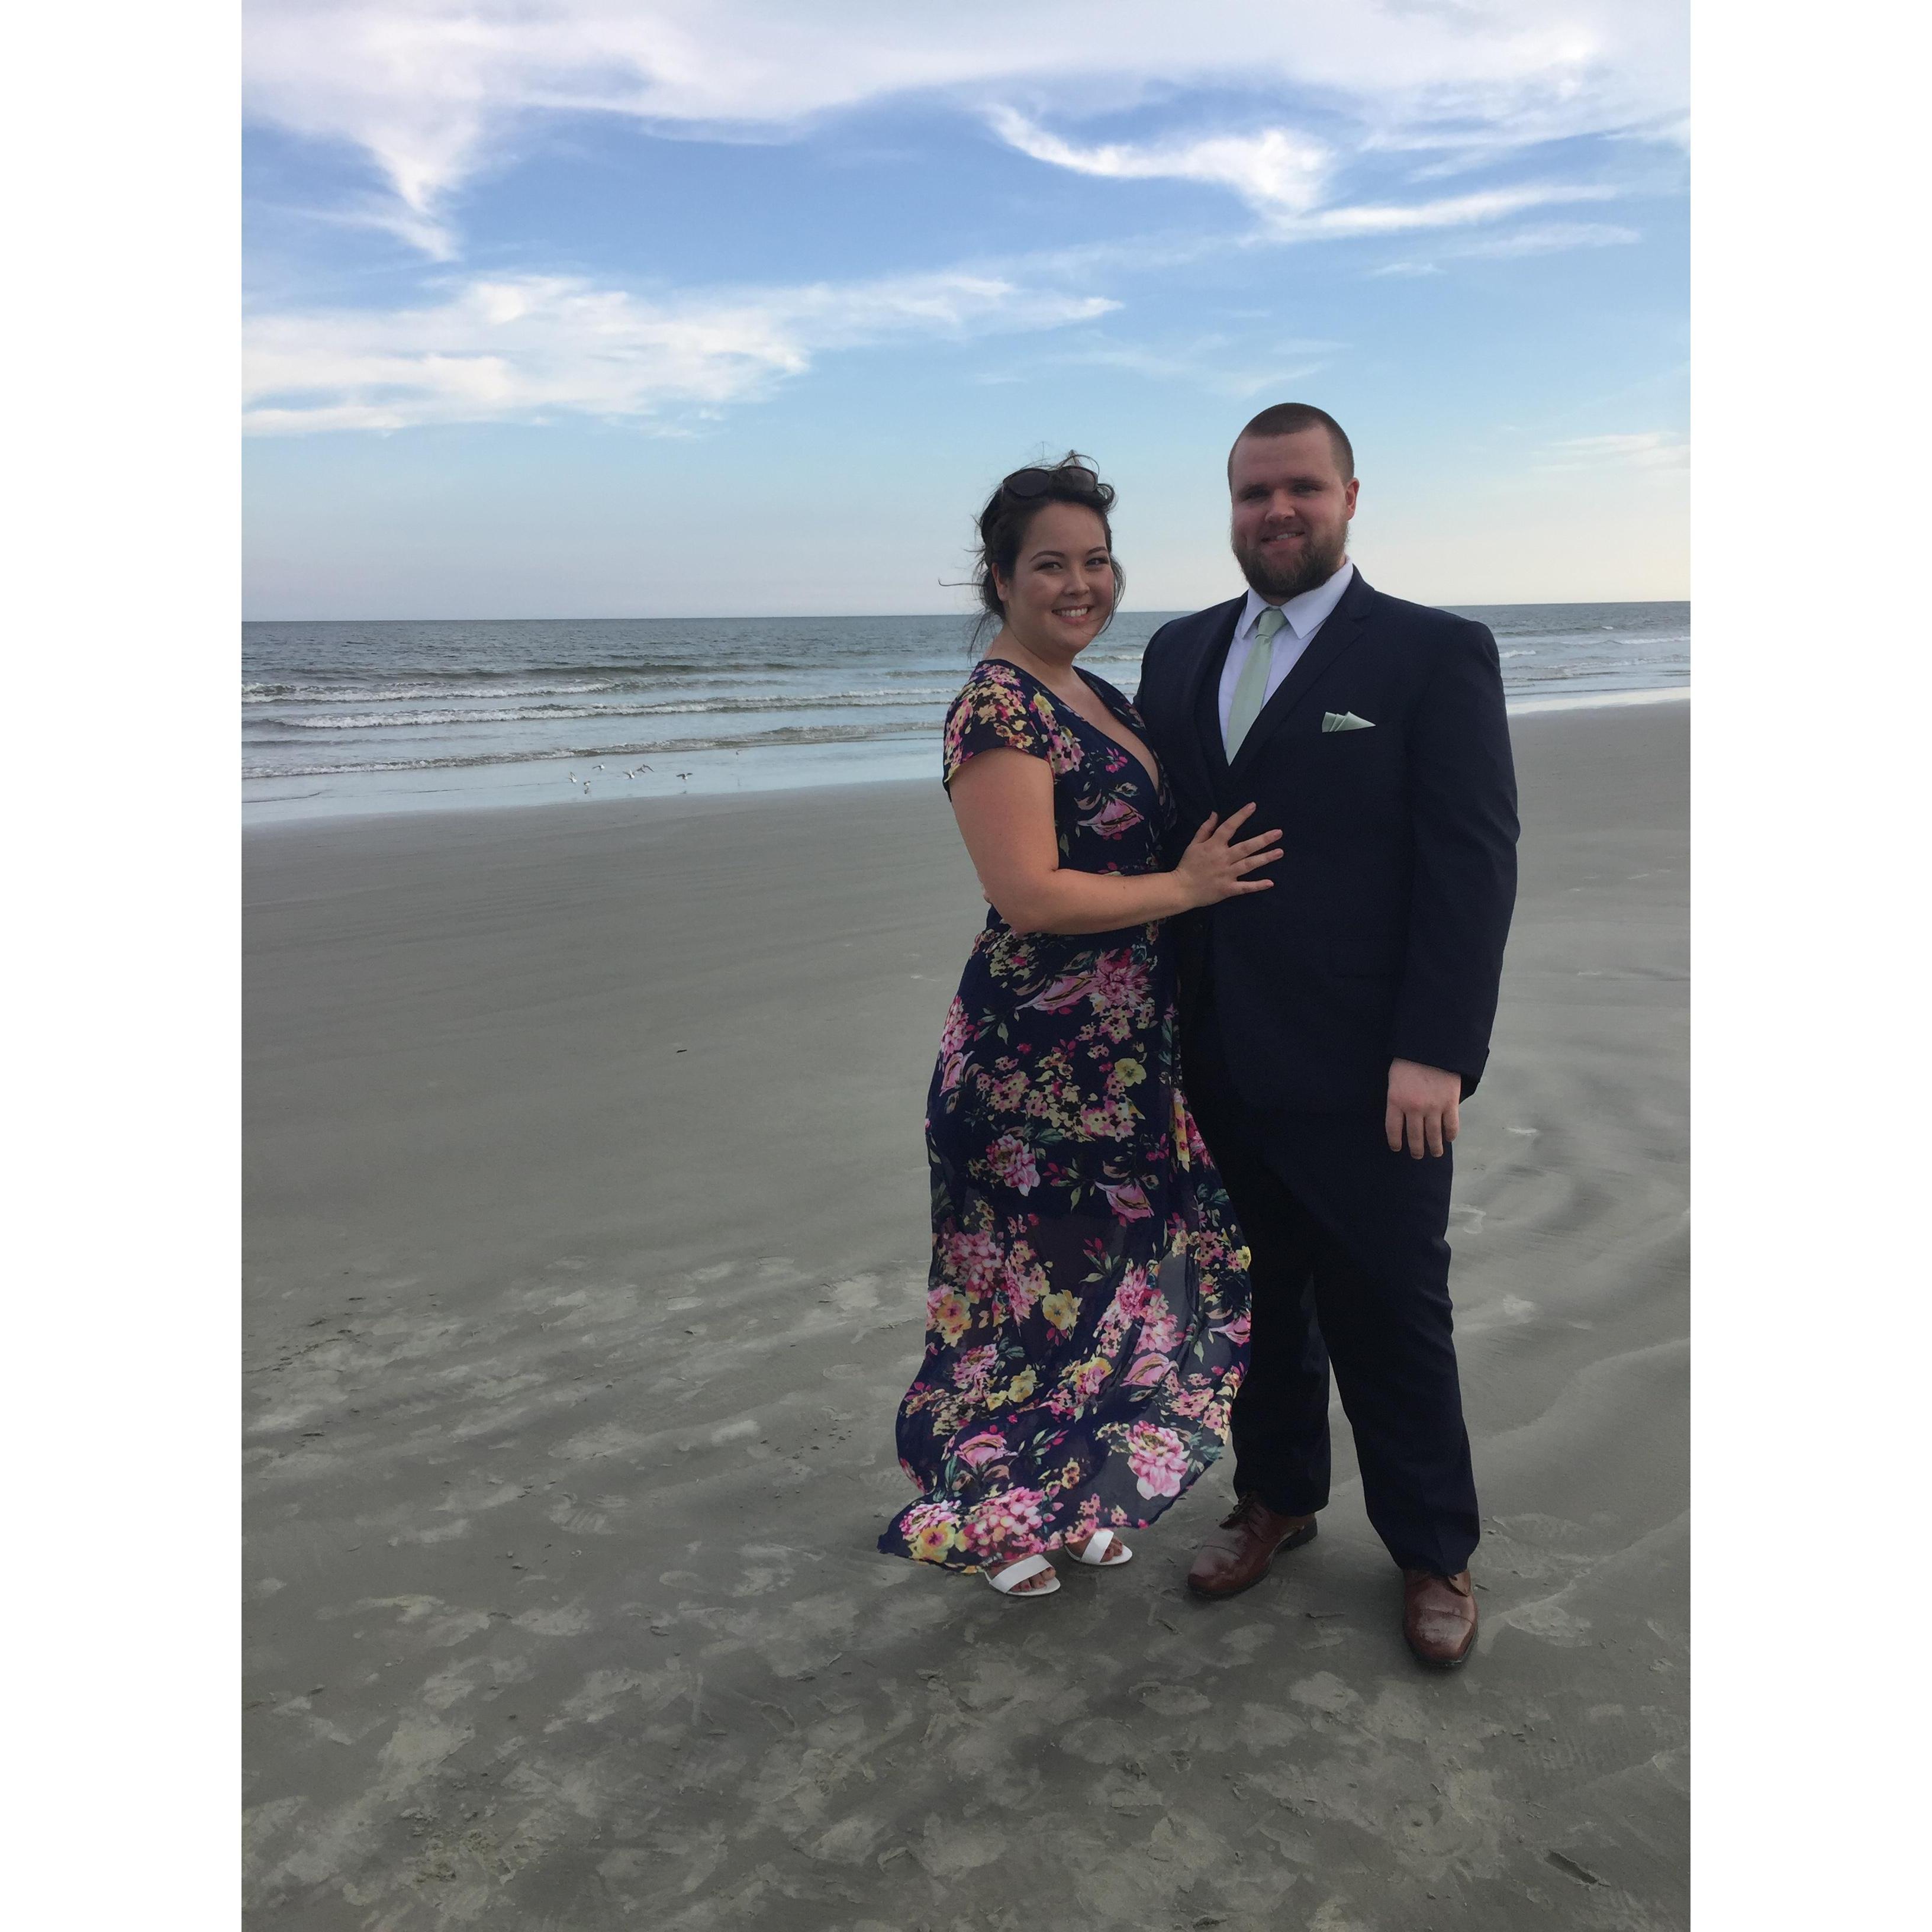 Matthew was the most handsome groomsmen at his best friends wedding in South Carolina.